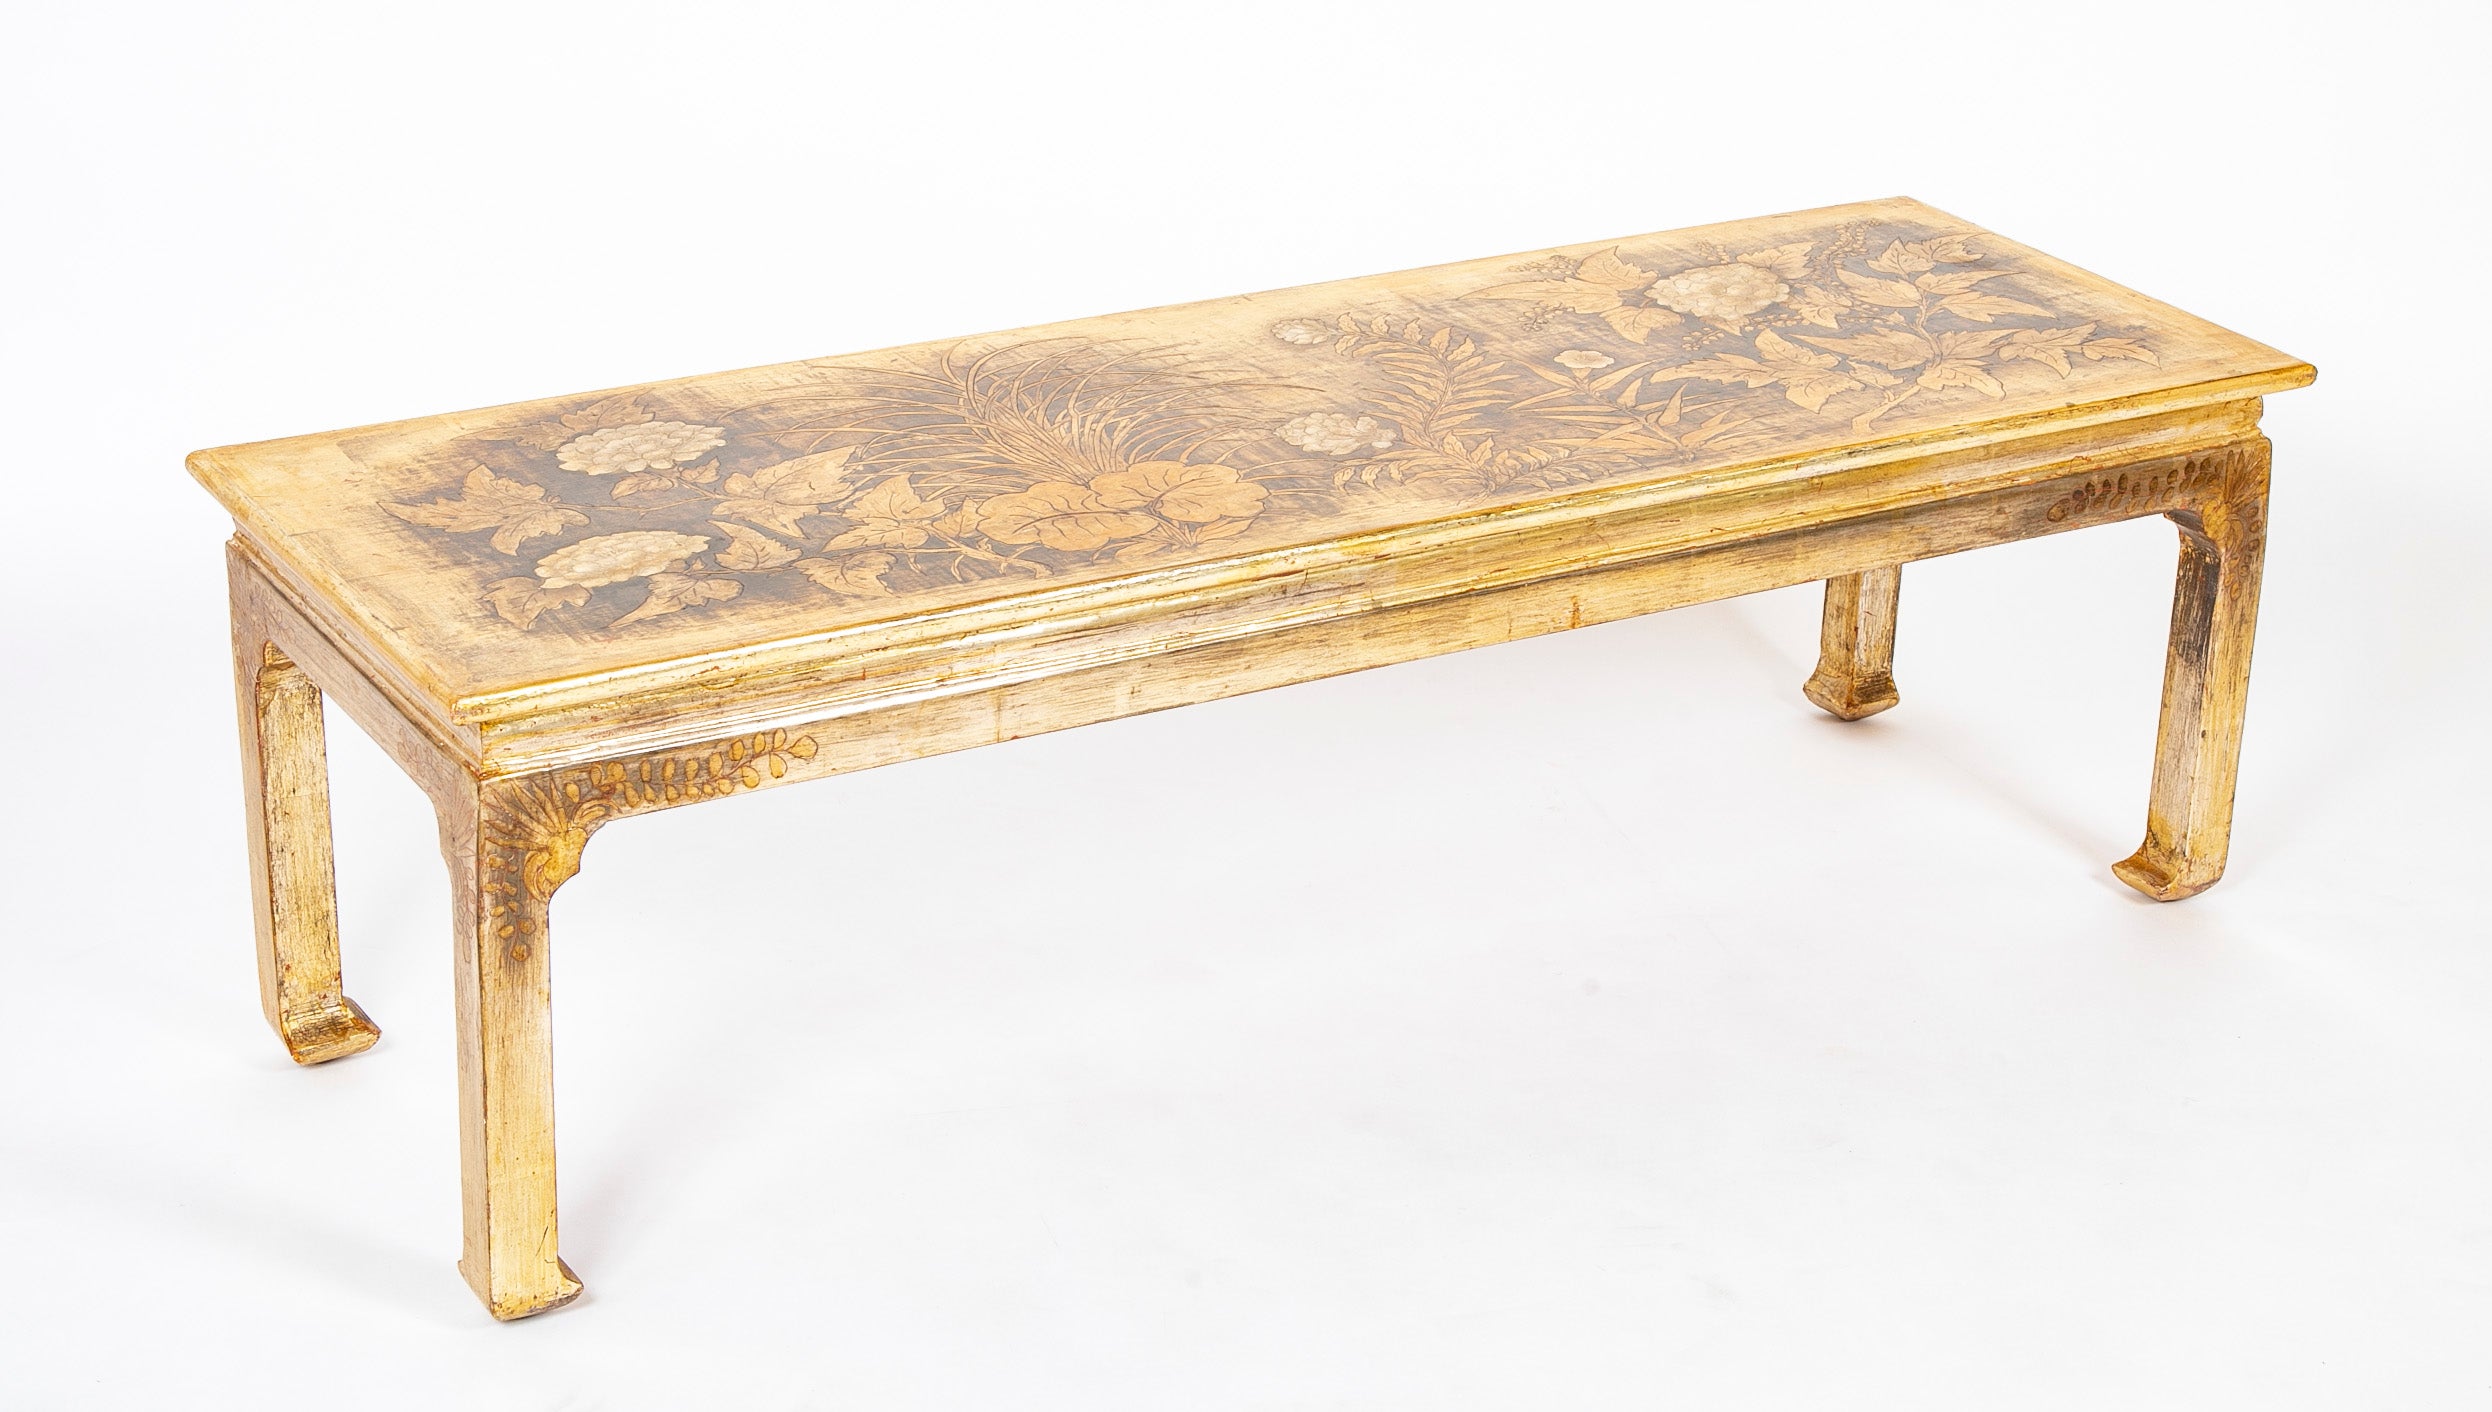 Max Kuehne Carved and Incised Wood Low Table with Gilt & Polycrhome Gessoed Top